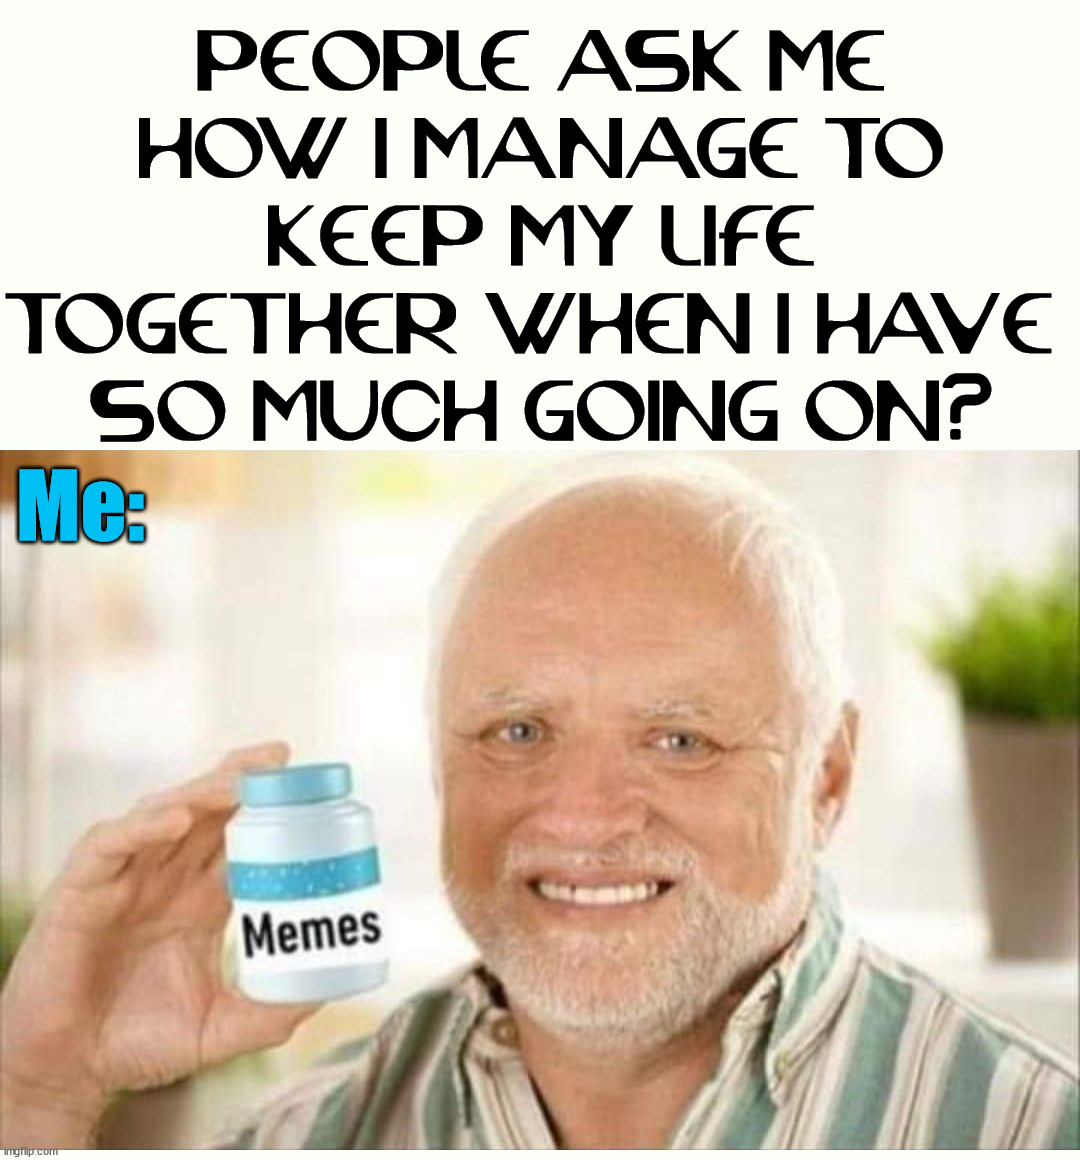 Memes seem to keep me sane. | PEOPLE ASK ME HOW I MANAGE TO KEEP MY LIFE TOGETHER WHEN I HAVE 
SO MUCH GOING ON? Me: | image tagged in memes,my life,imgflip,it's all coming together | made w/ Imgflip meme maker